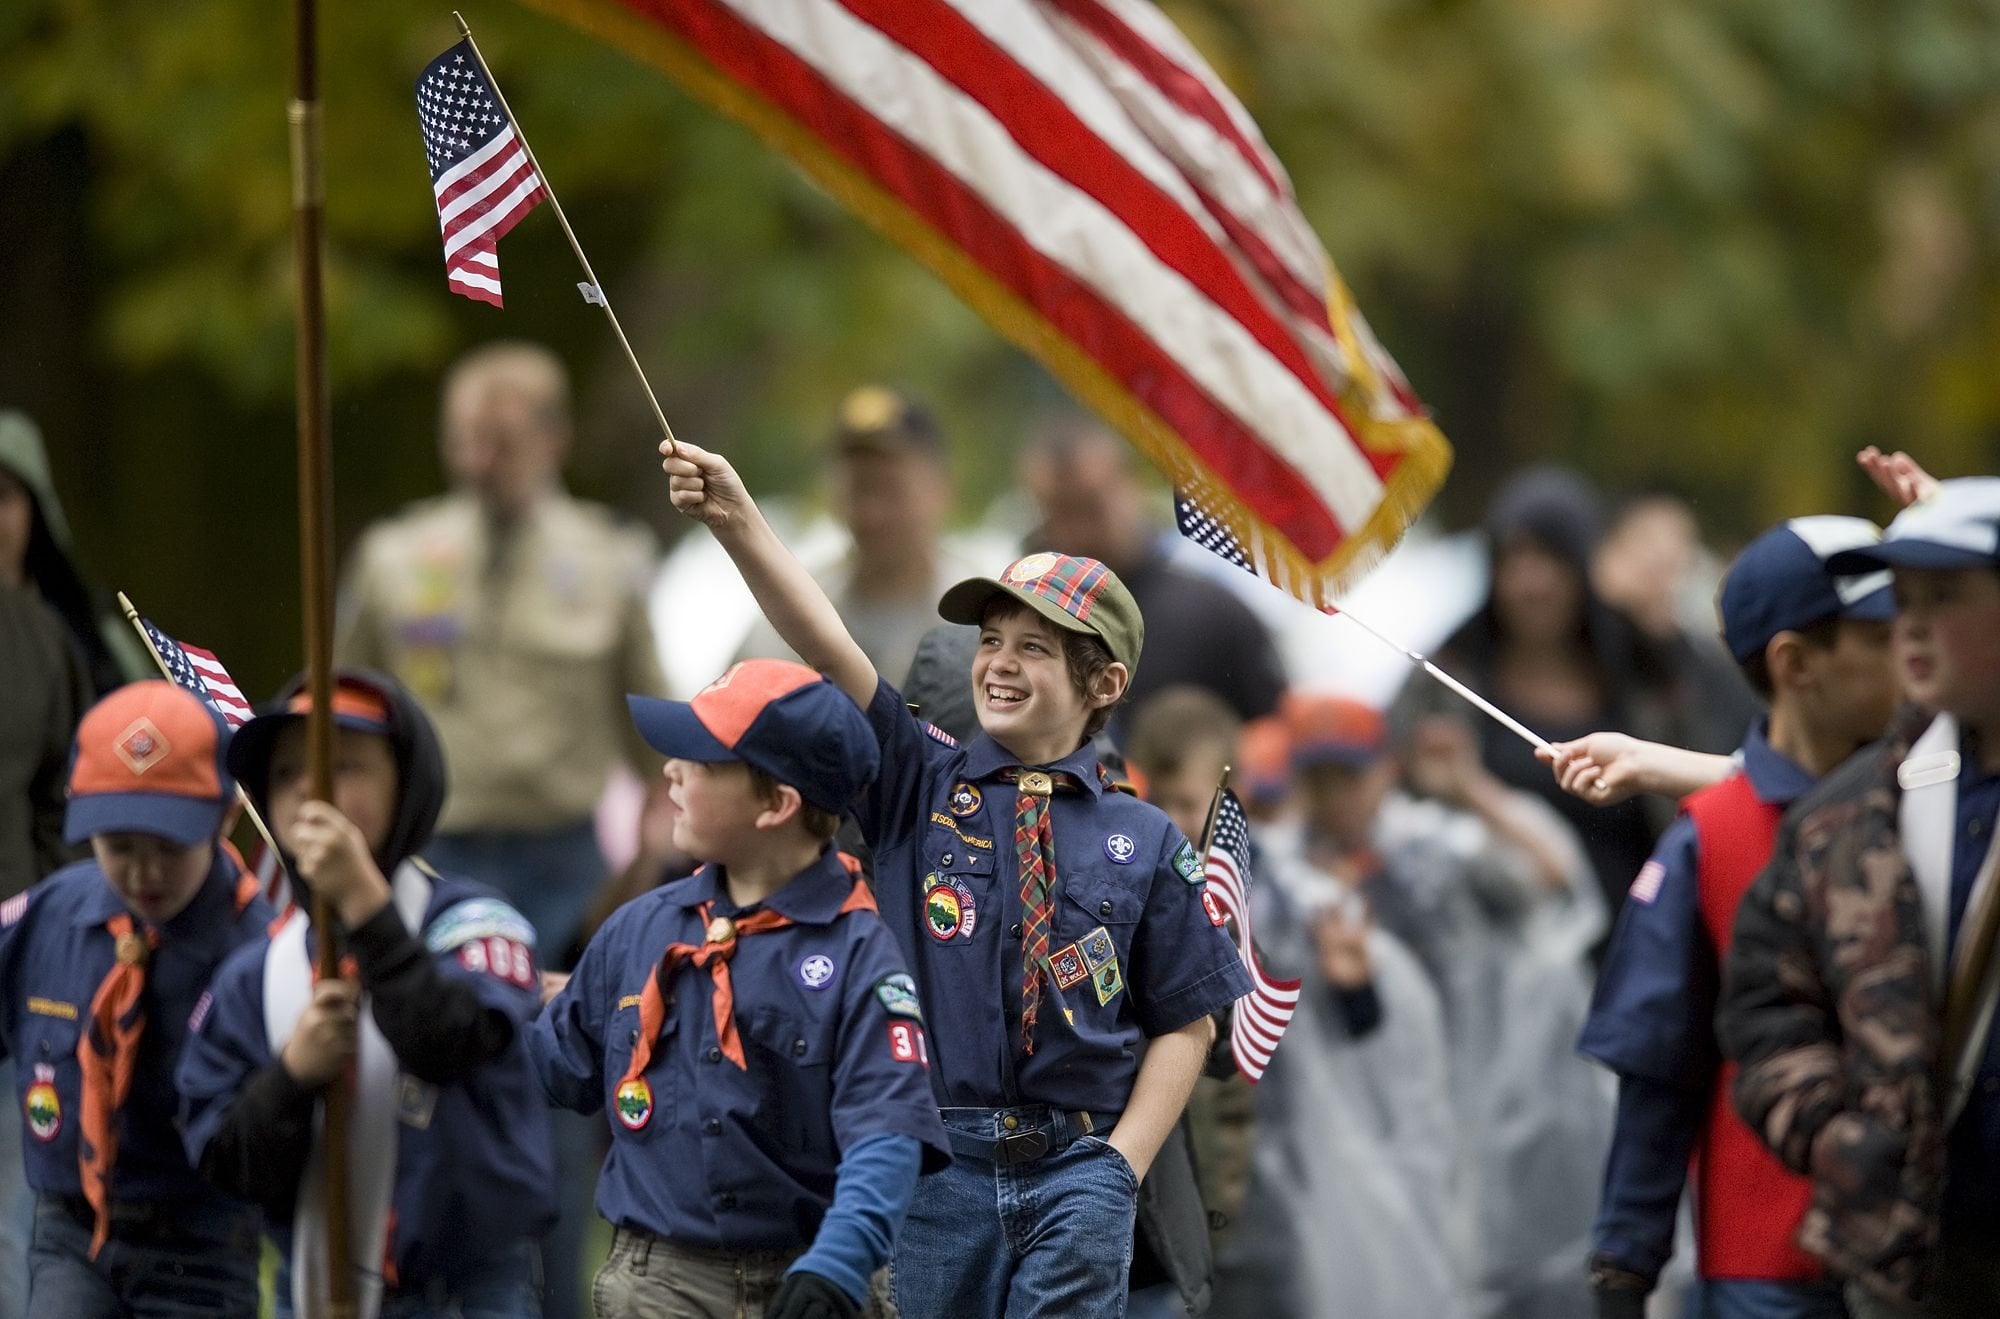 Cub Scout Pack 306 marches Saturday in the annual Veterans Parade at Fort Vancouver National Site.